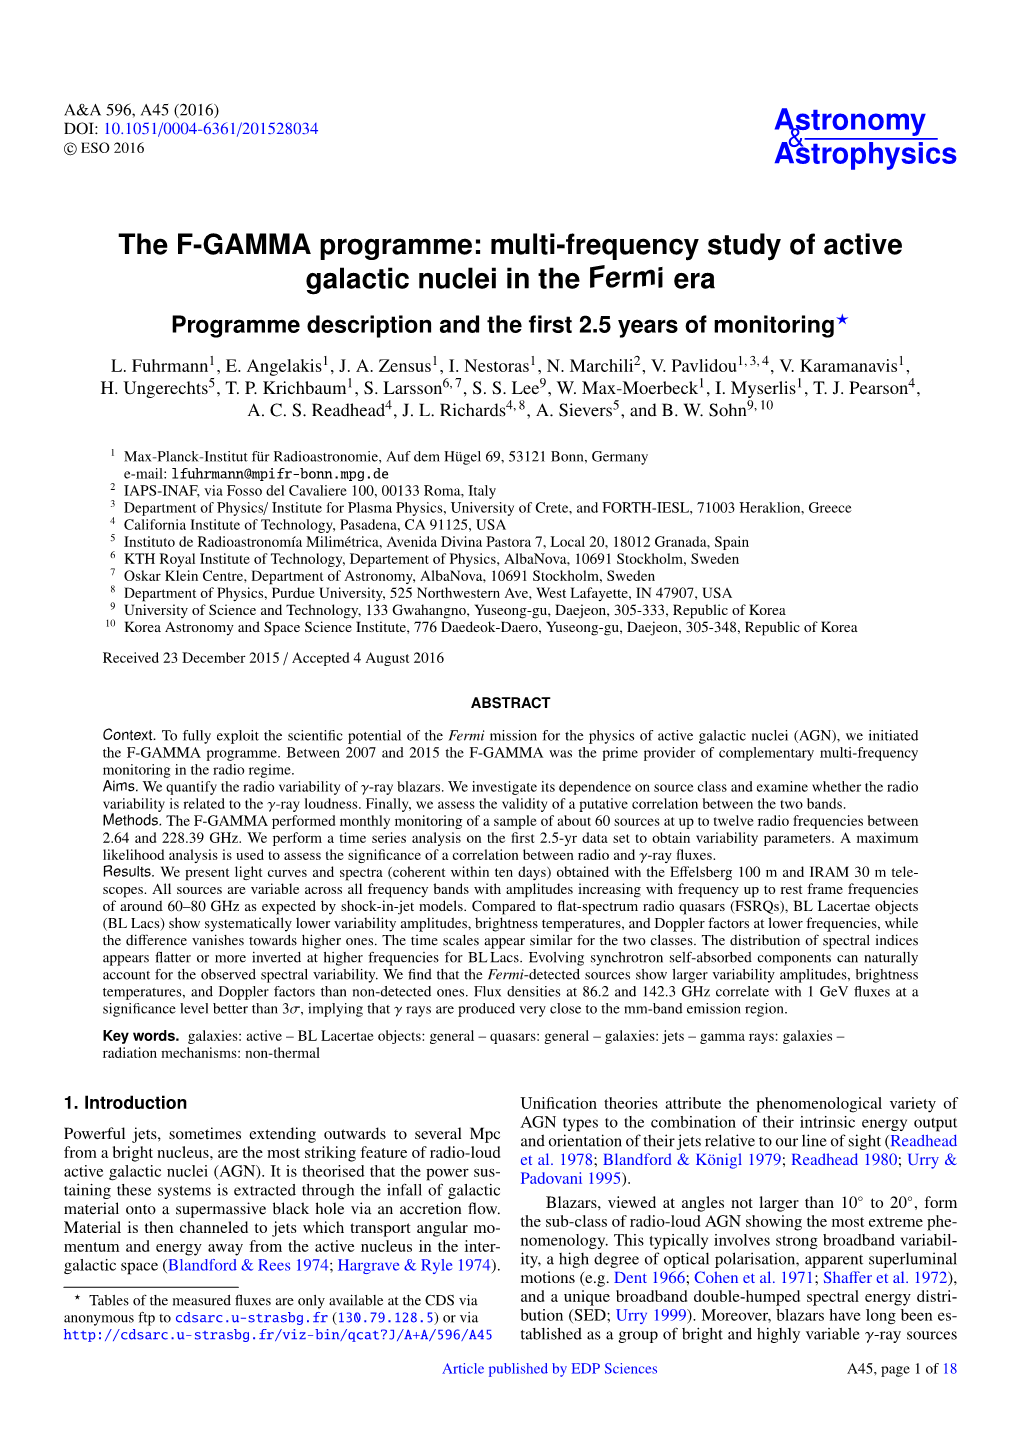 The F-GAMMA Programme: Multi-Frequency Study of Active Galactic Nuclei in the Fermi Era Programme Description and the ﬁrst 2.5 Years of Monitoring?